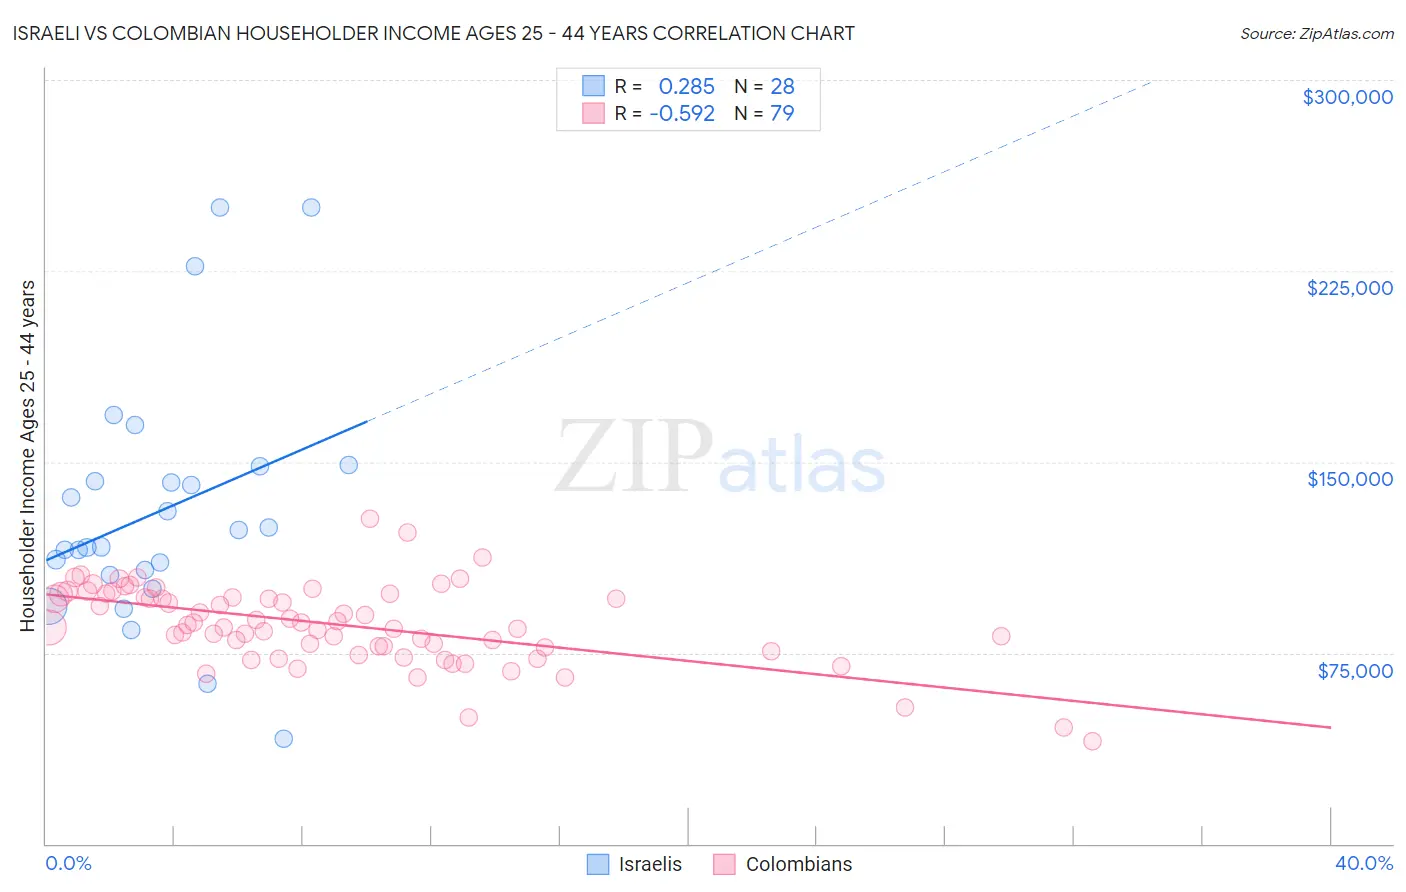 Israeli vs Colombian Householder Income Ages 25 - 44 years